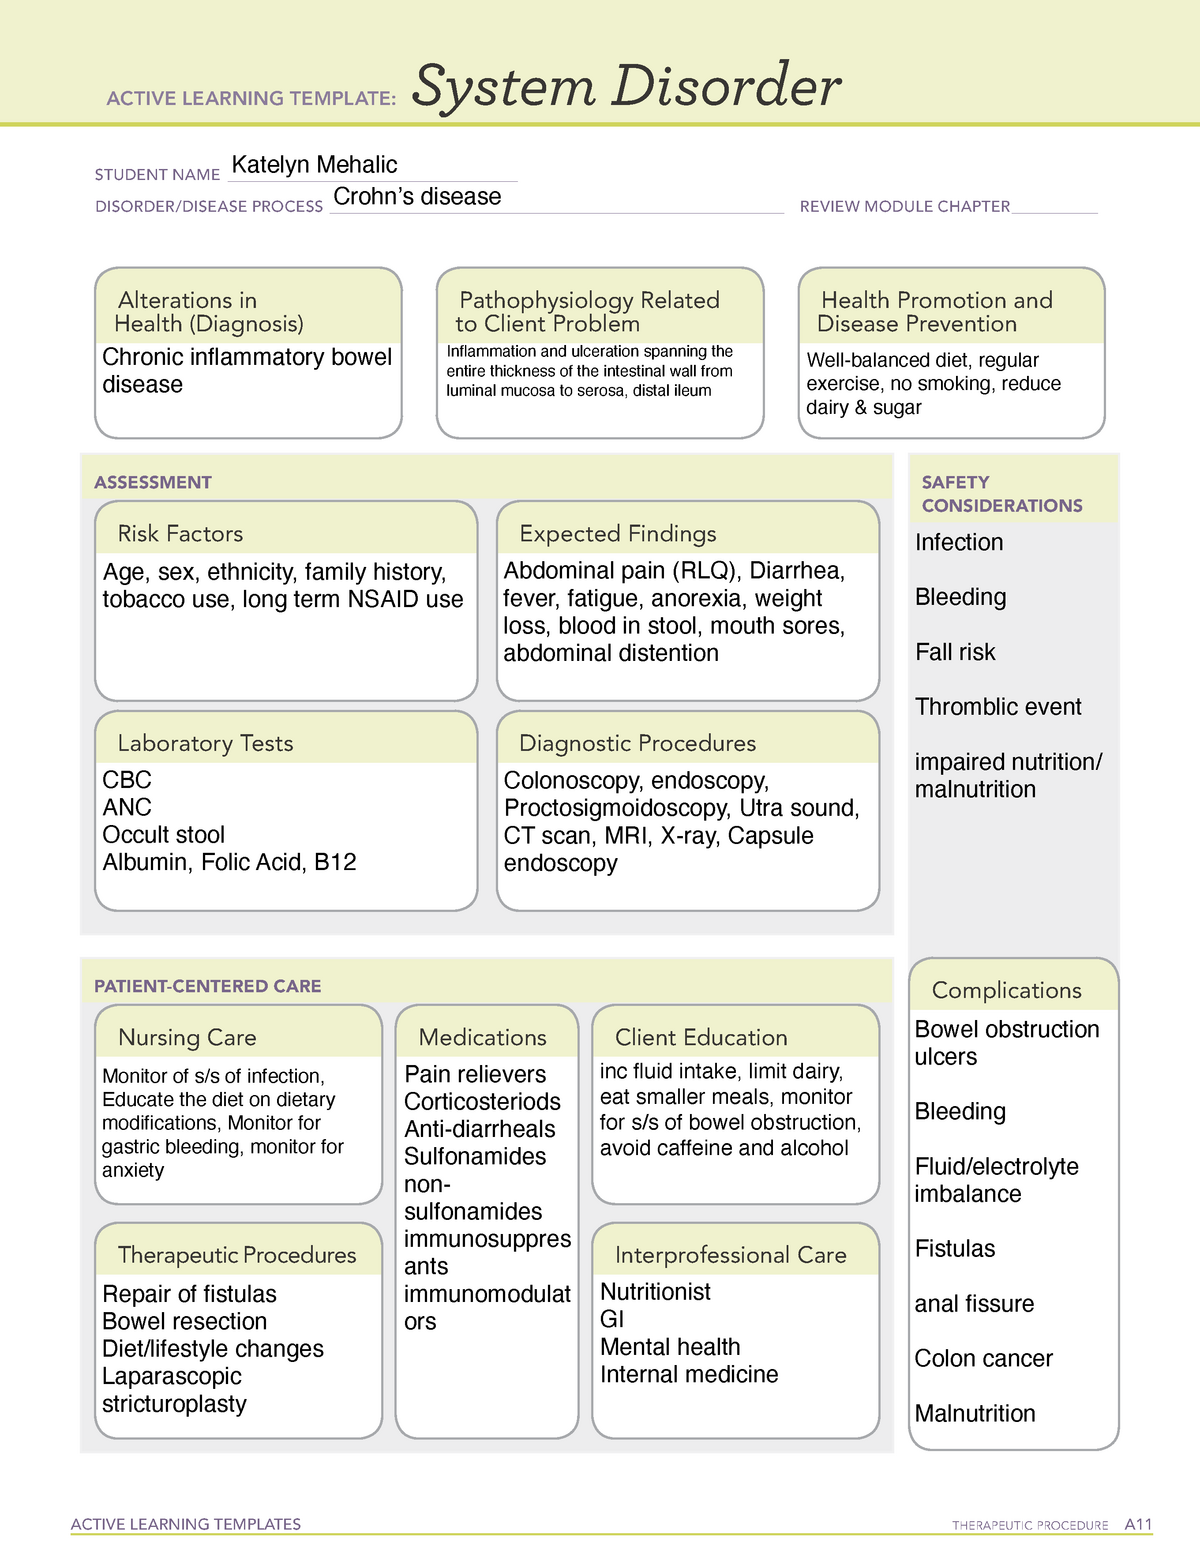 Crohn's disease adult 1 ati assignments ACTIVE LEARNING TEMPLATES